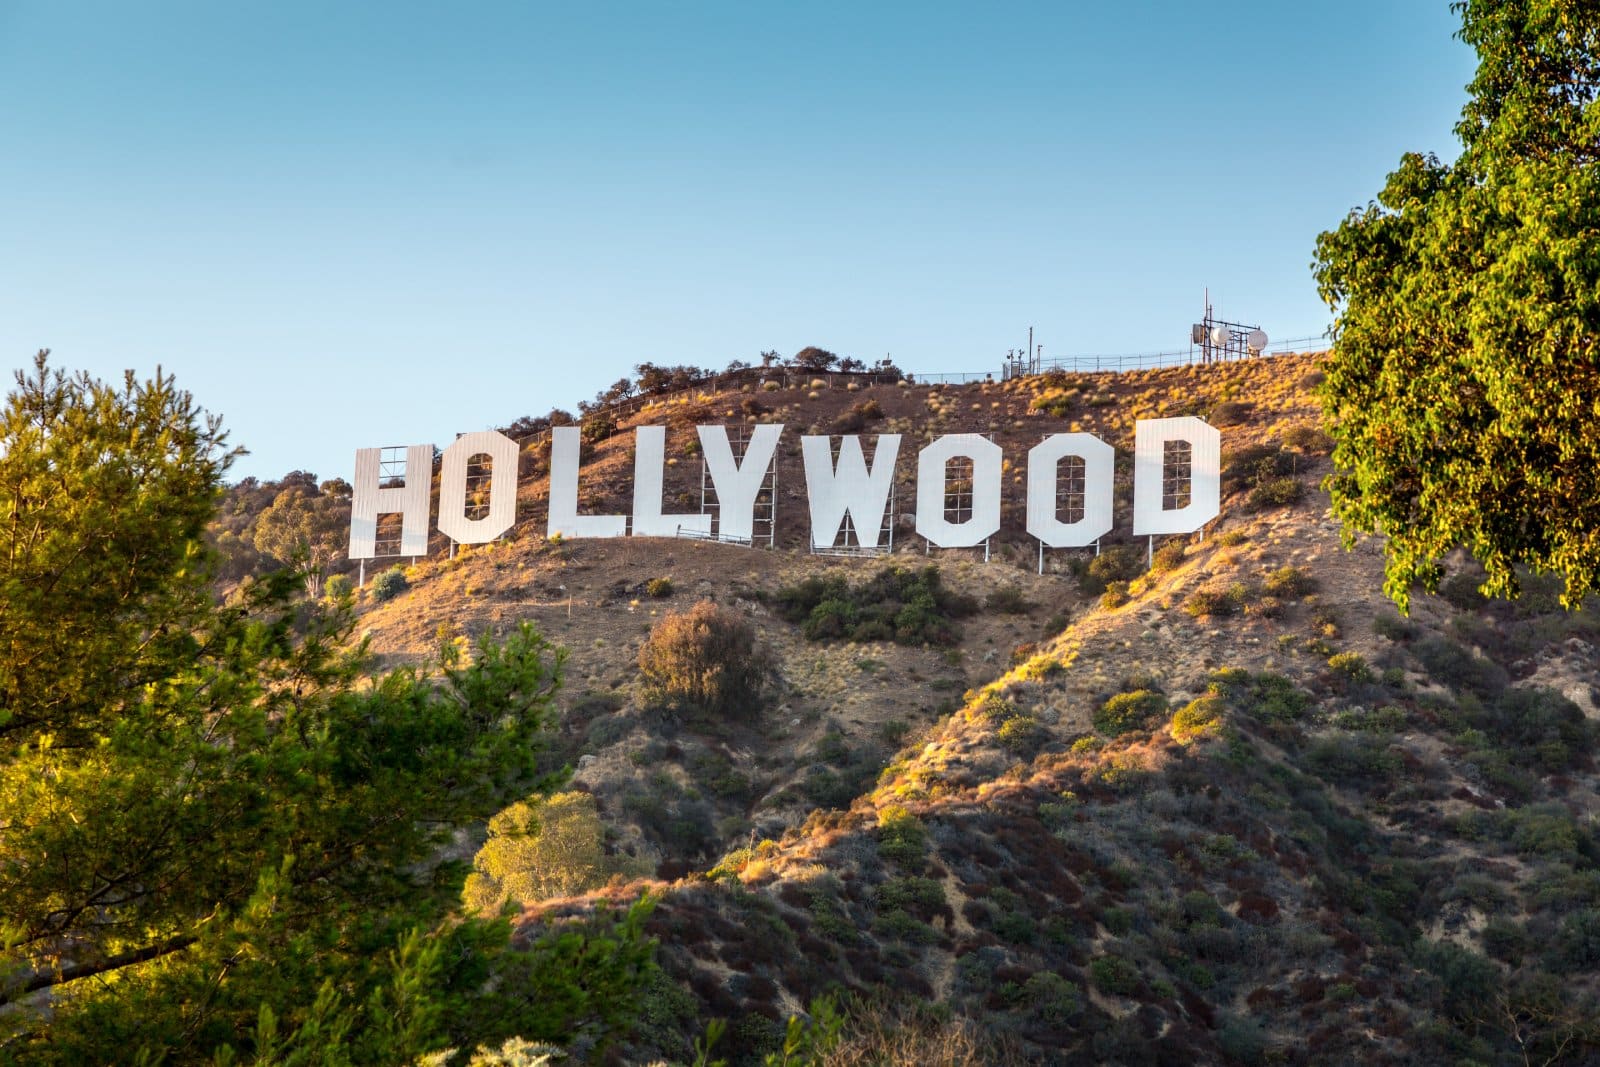 <p><span>Experience Hollywood glamour with upscale hotel rooms priced at $400 to $800 per night. Dine at celebrity chef restaurants with dinners for two ranging from $300 to $500, and explore celebrity homes on a VIP tour priced at $100 to $200 per person.</span></p>